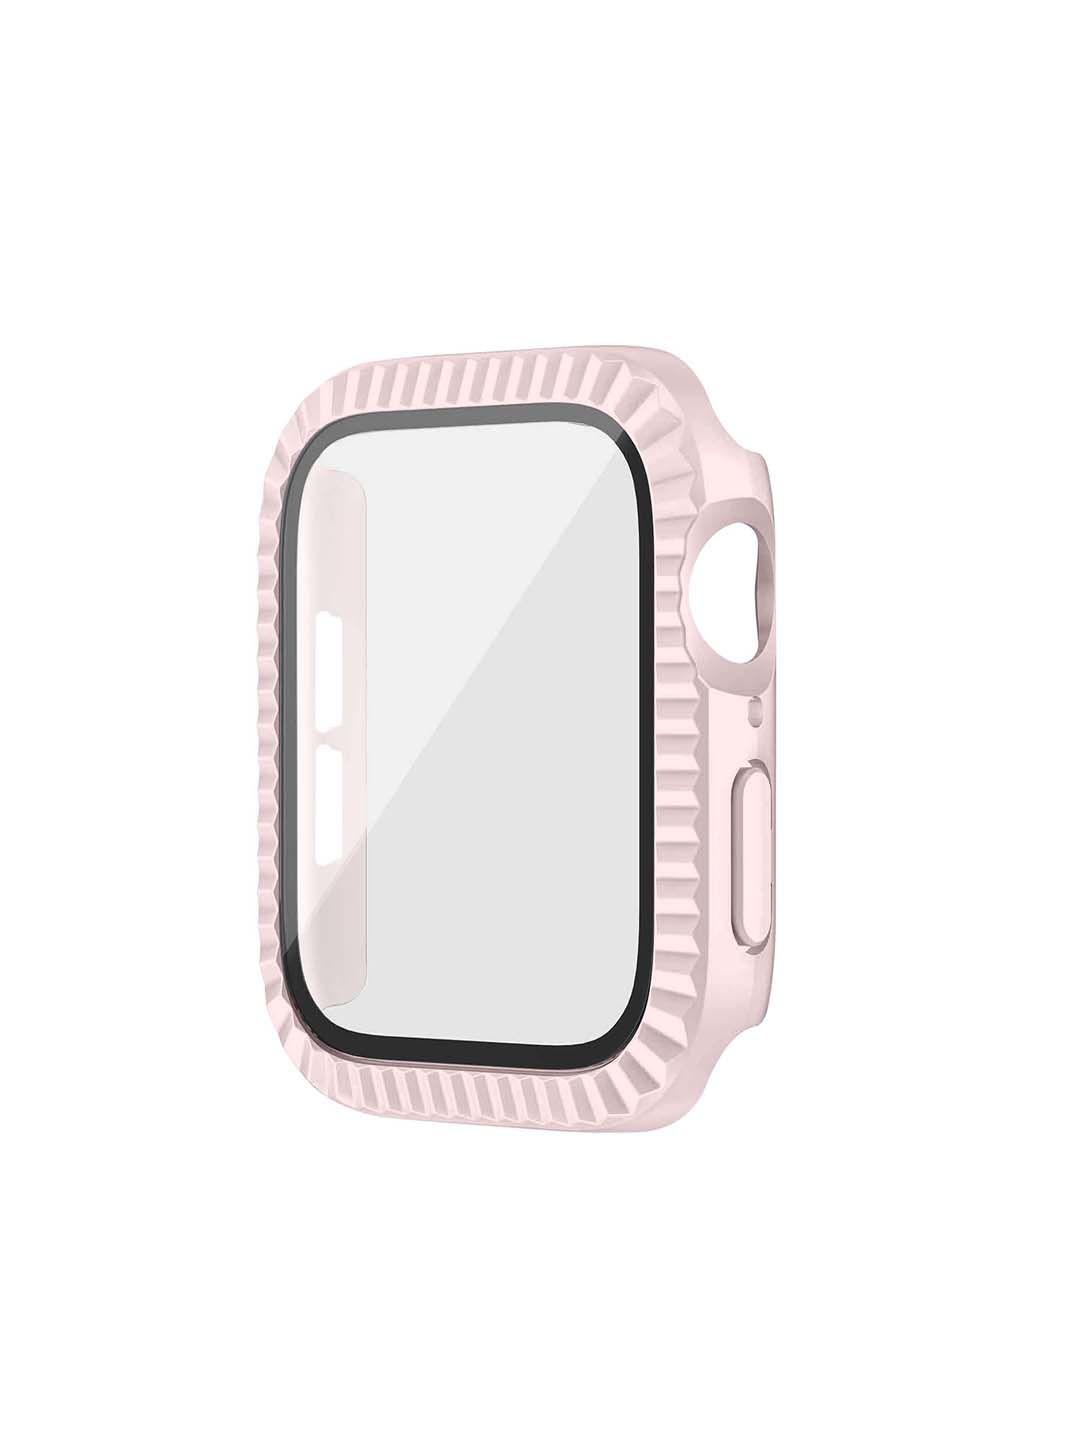 dailyobjects ribbed fit apple watch series case with screen protector straps